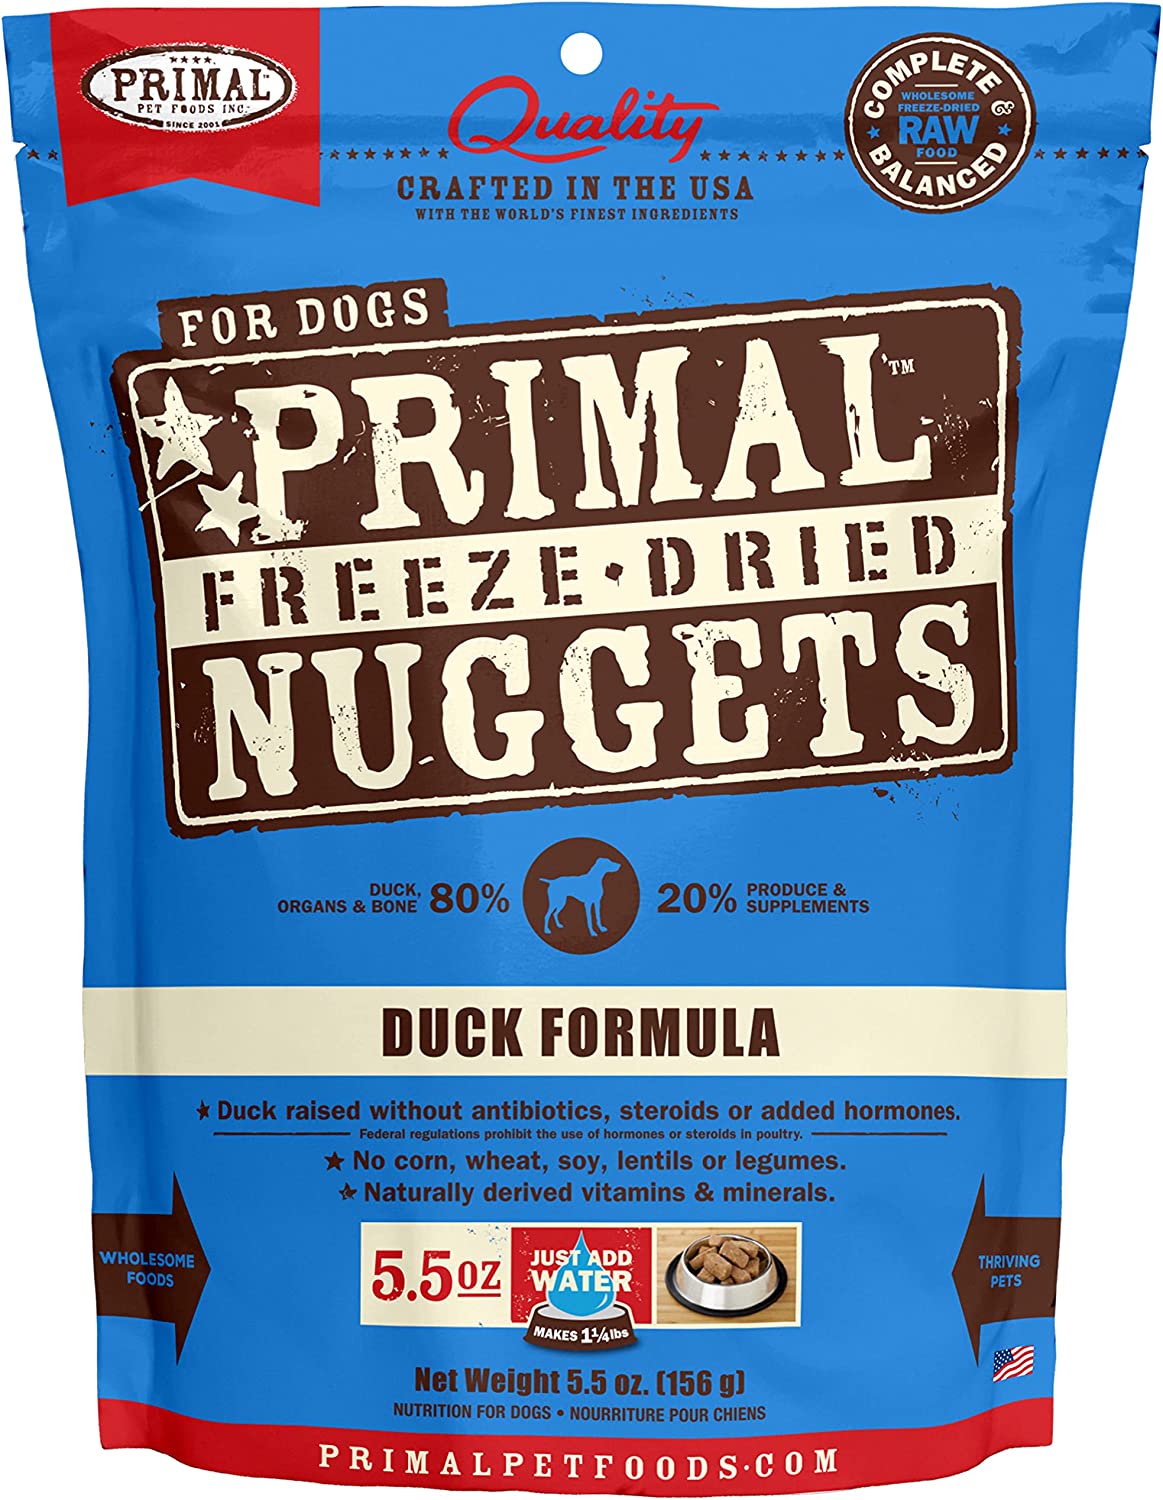 Primal Freeze Dried Dog Food Nuggets Duck Formula, Crafted in The USA Grain Free Raw Dog Food, 5.5 oz